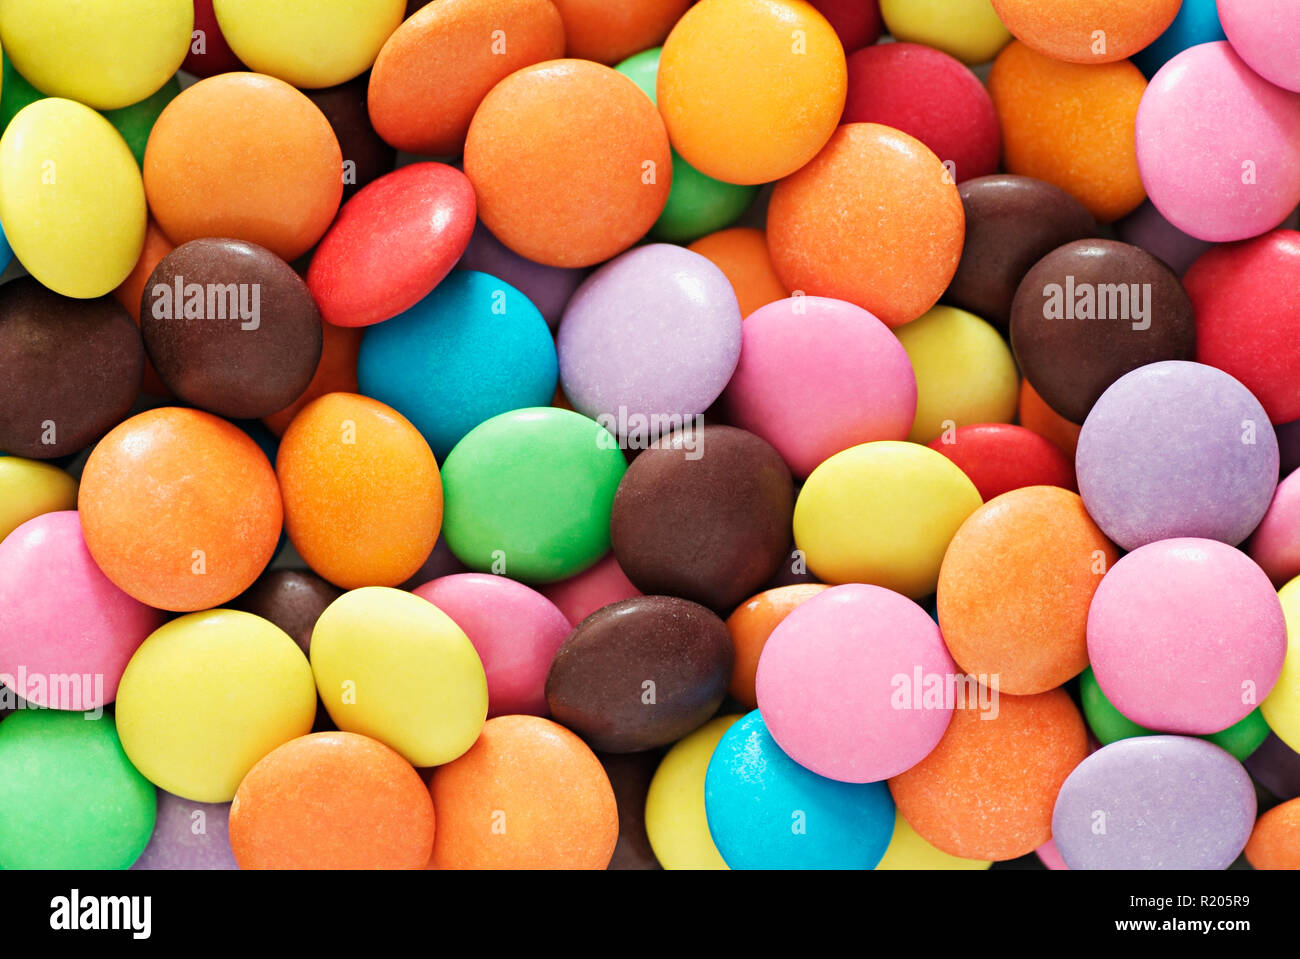 Colourful Chocolate Candy Sweets Stock Photo